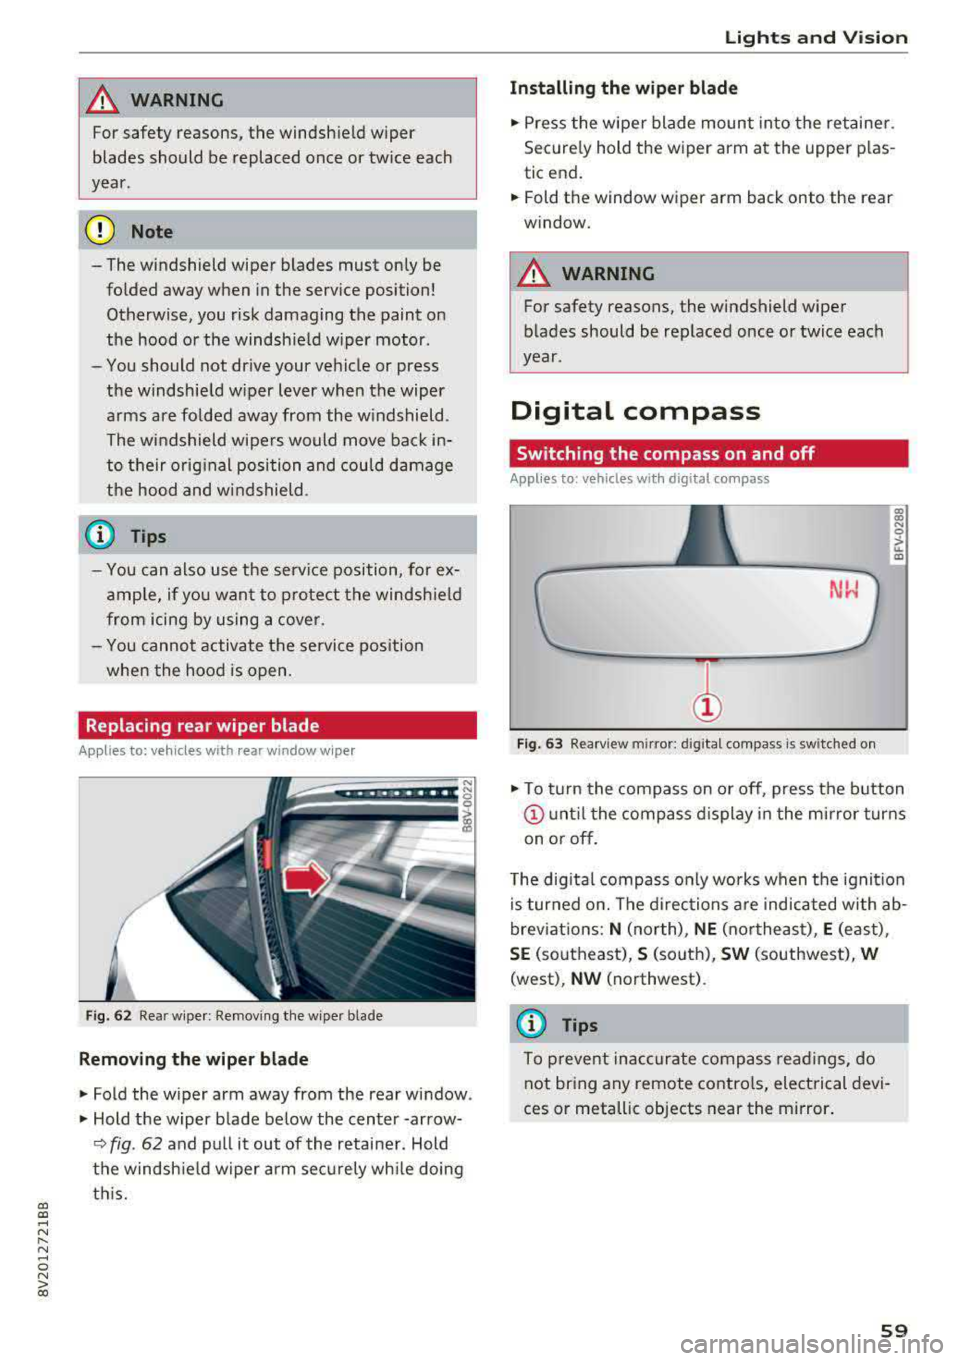 AUDI A3 SEDAN 2017  Owners Manual a, co .... N 
" N .... 0 N > 00 
_& WARNING 
For safety  reasons,  the  windshield  wiper 
blades  should  be  replaced  once  or twice  each 
year . 
(D Note 
-The windshield  wiper  blades  must  on